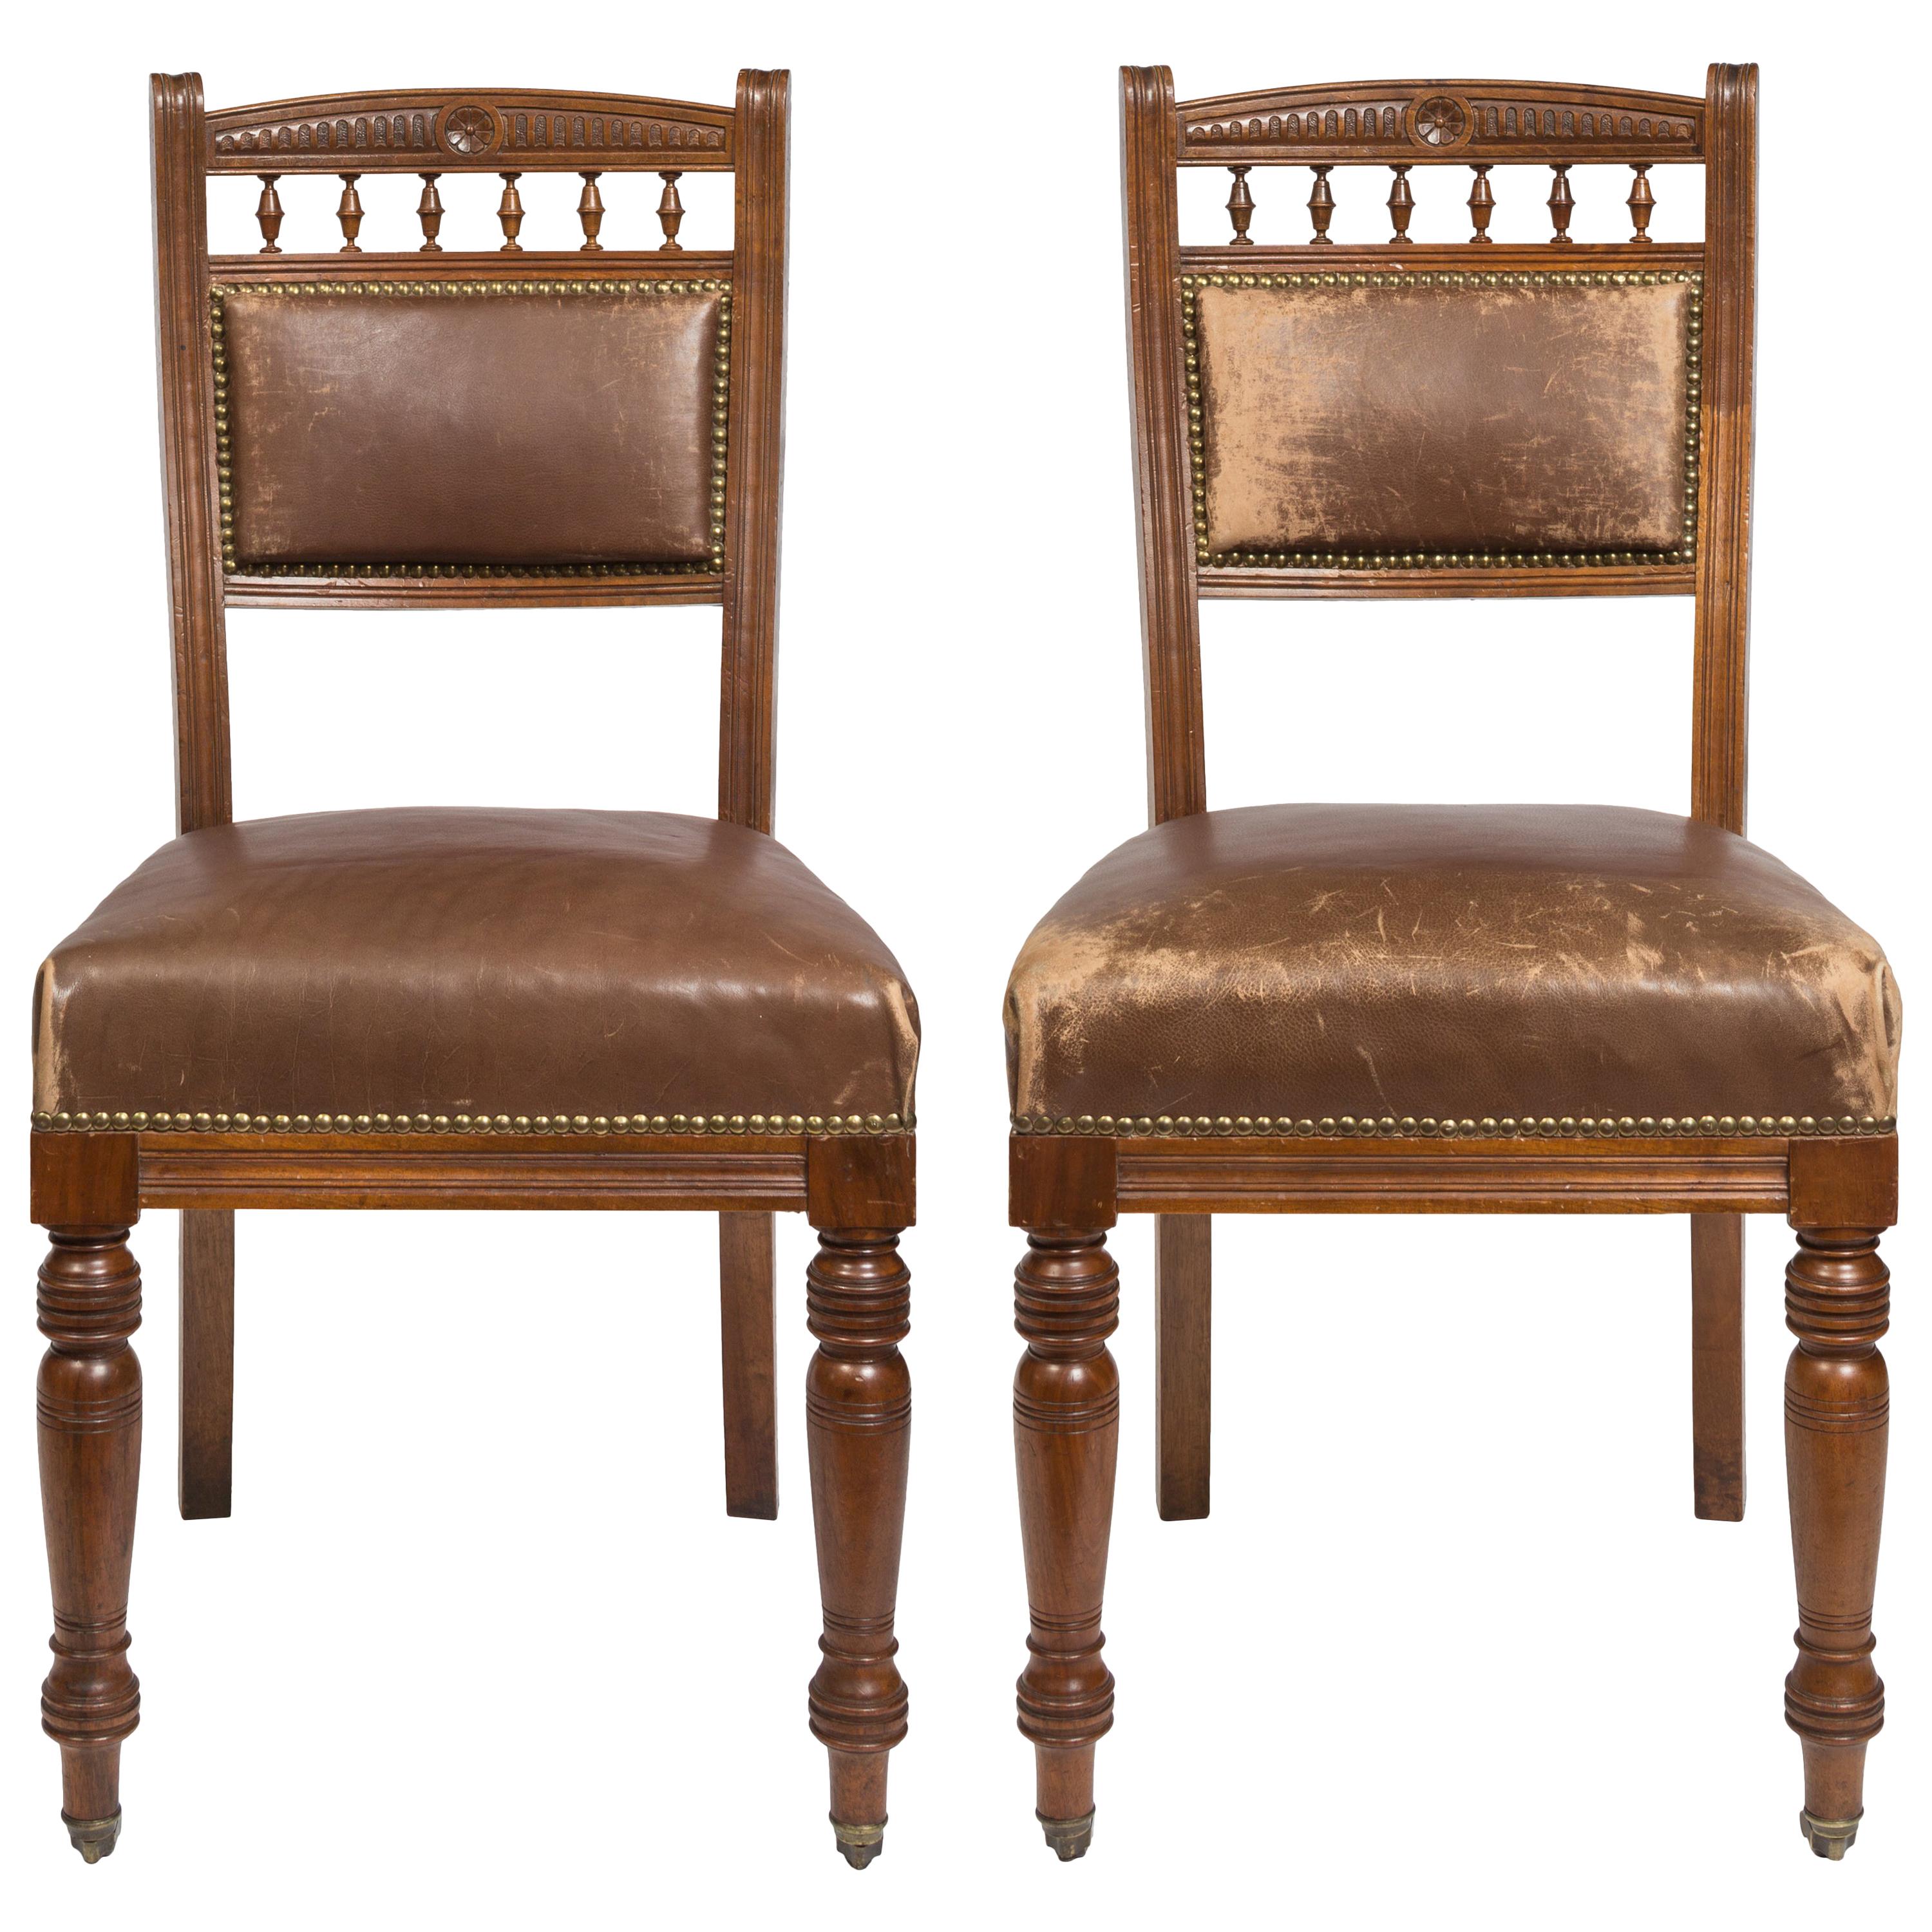 Matched Pair Victorian Style Chocolate Brown Leather Upholstered Dining Chairs